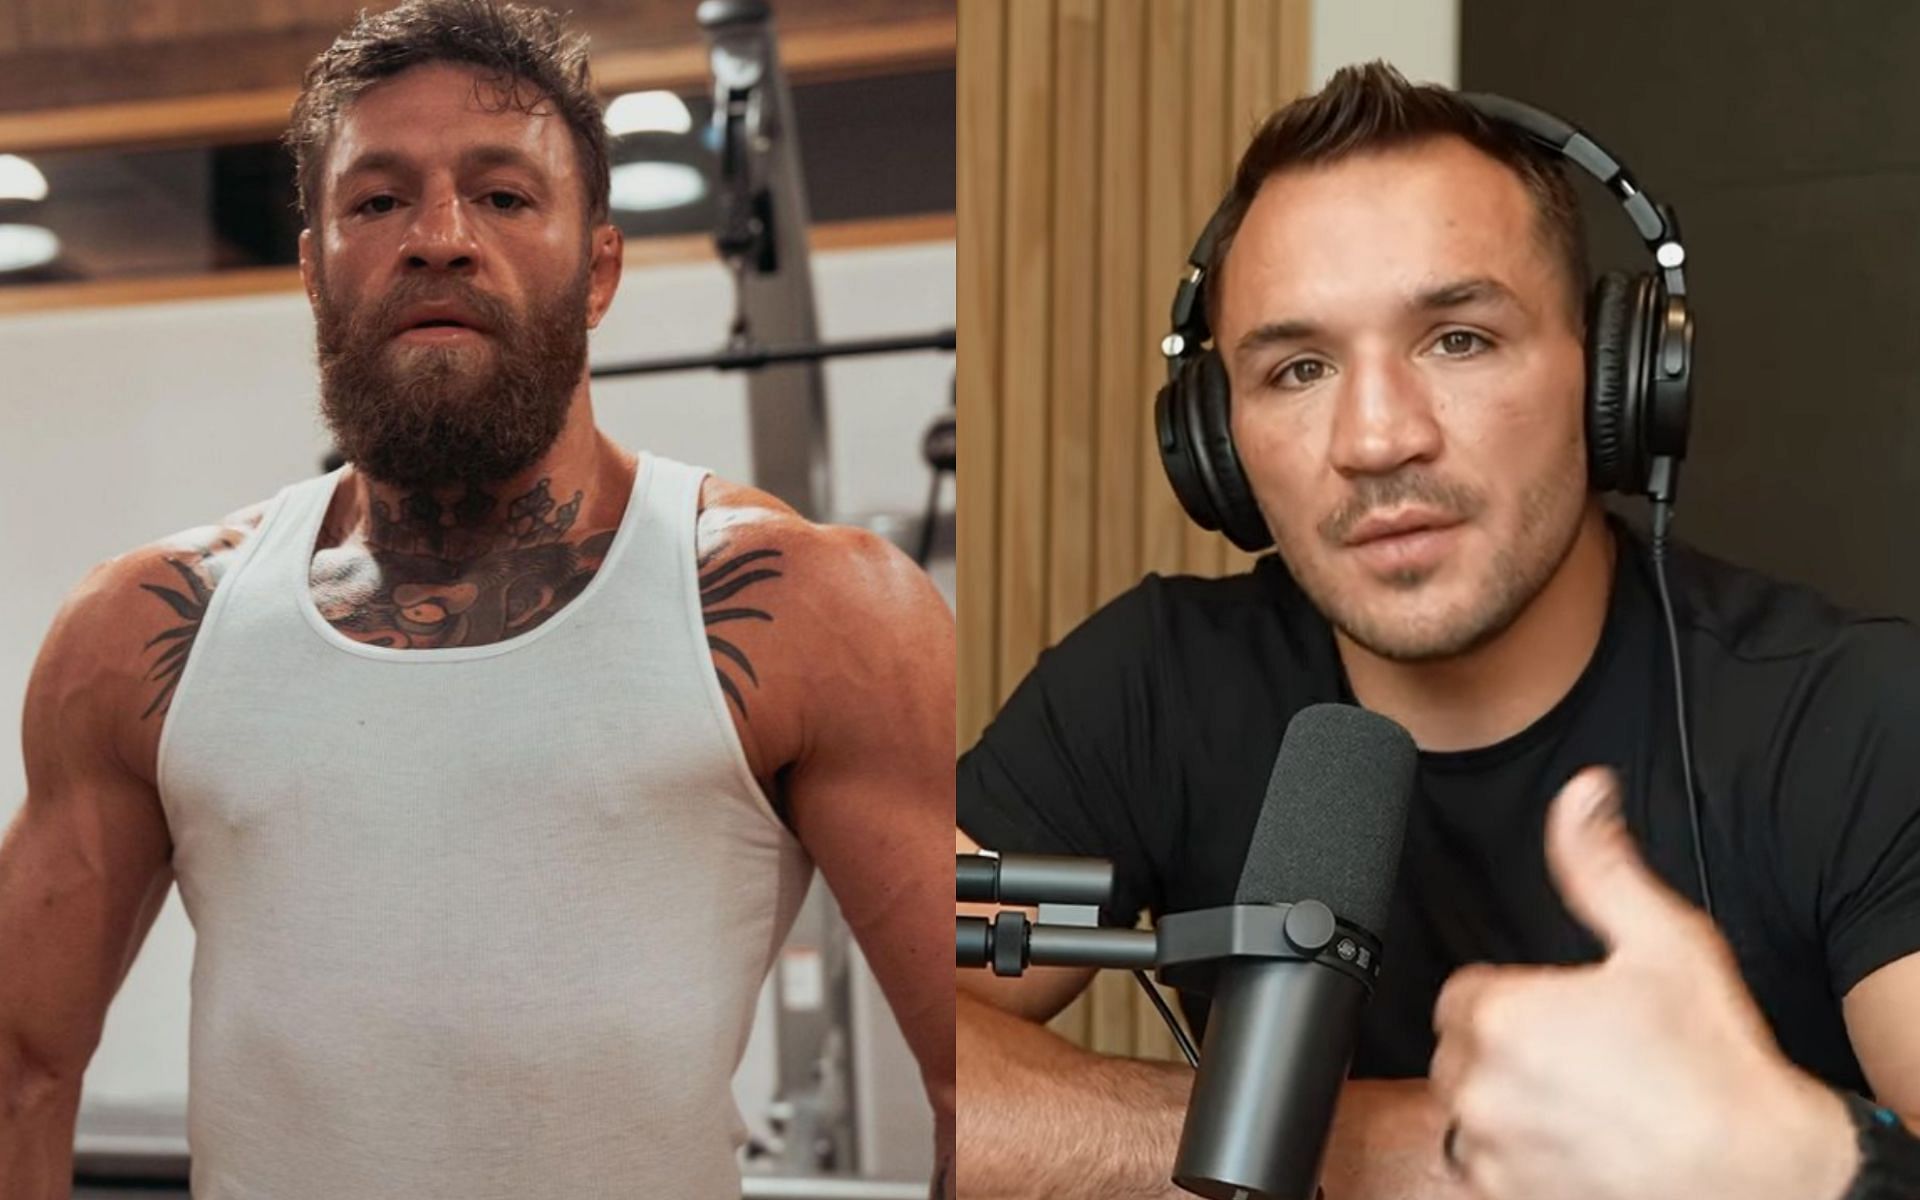 Michael Chandler (right) claims he originally requested a fight at a higher weight class against Conor McGregor (left) [Images Courtesy: @thenotoriousmma on Instagram and @michaelchandler on YouTube]